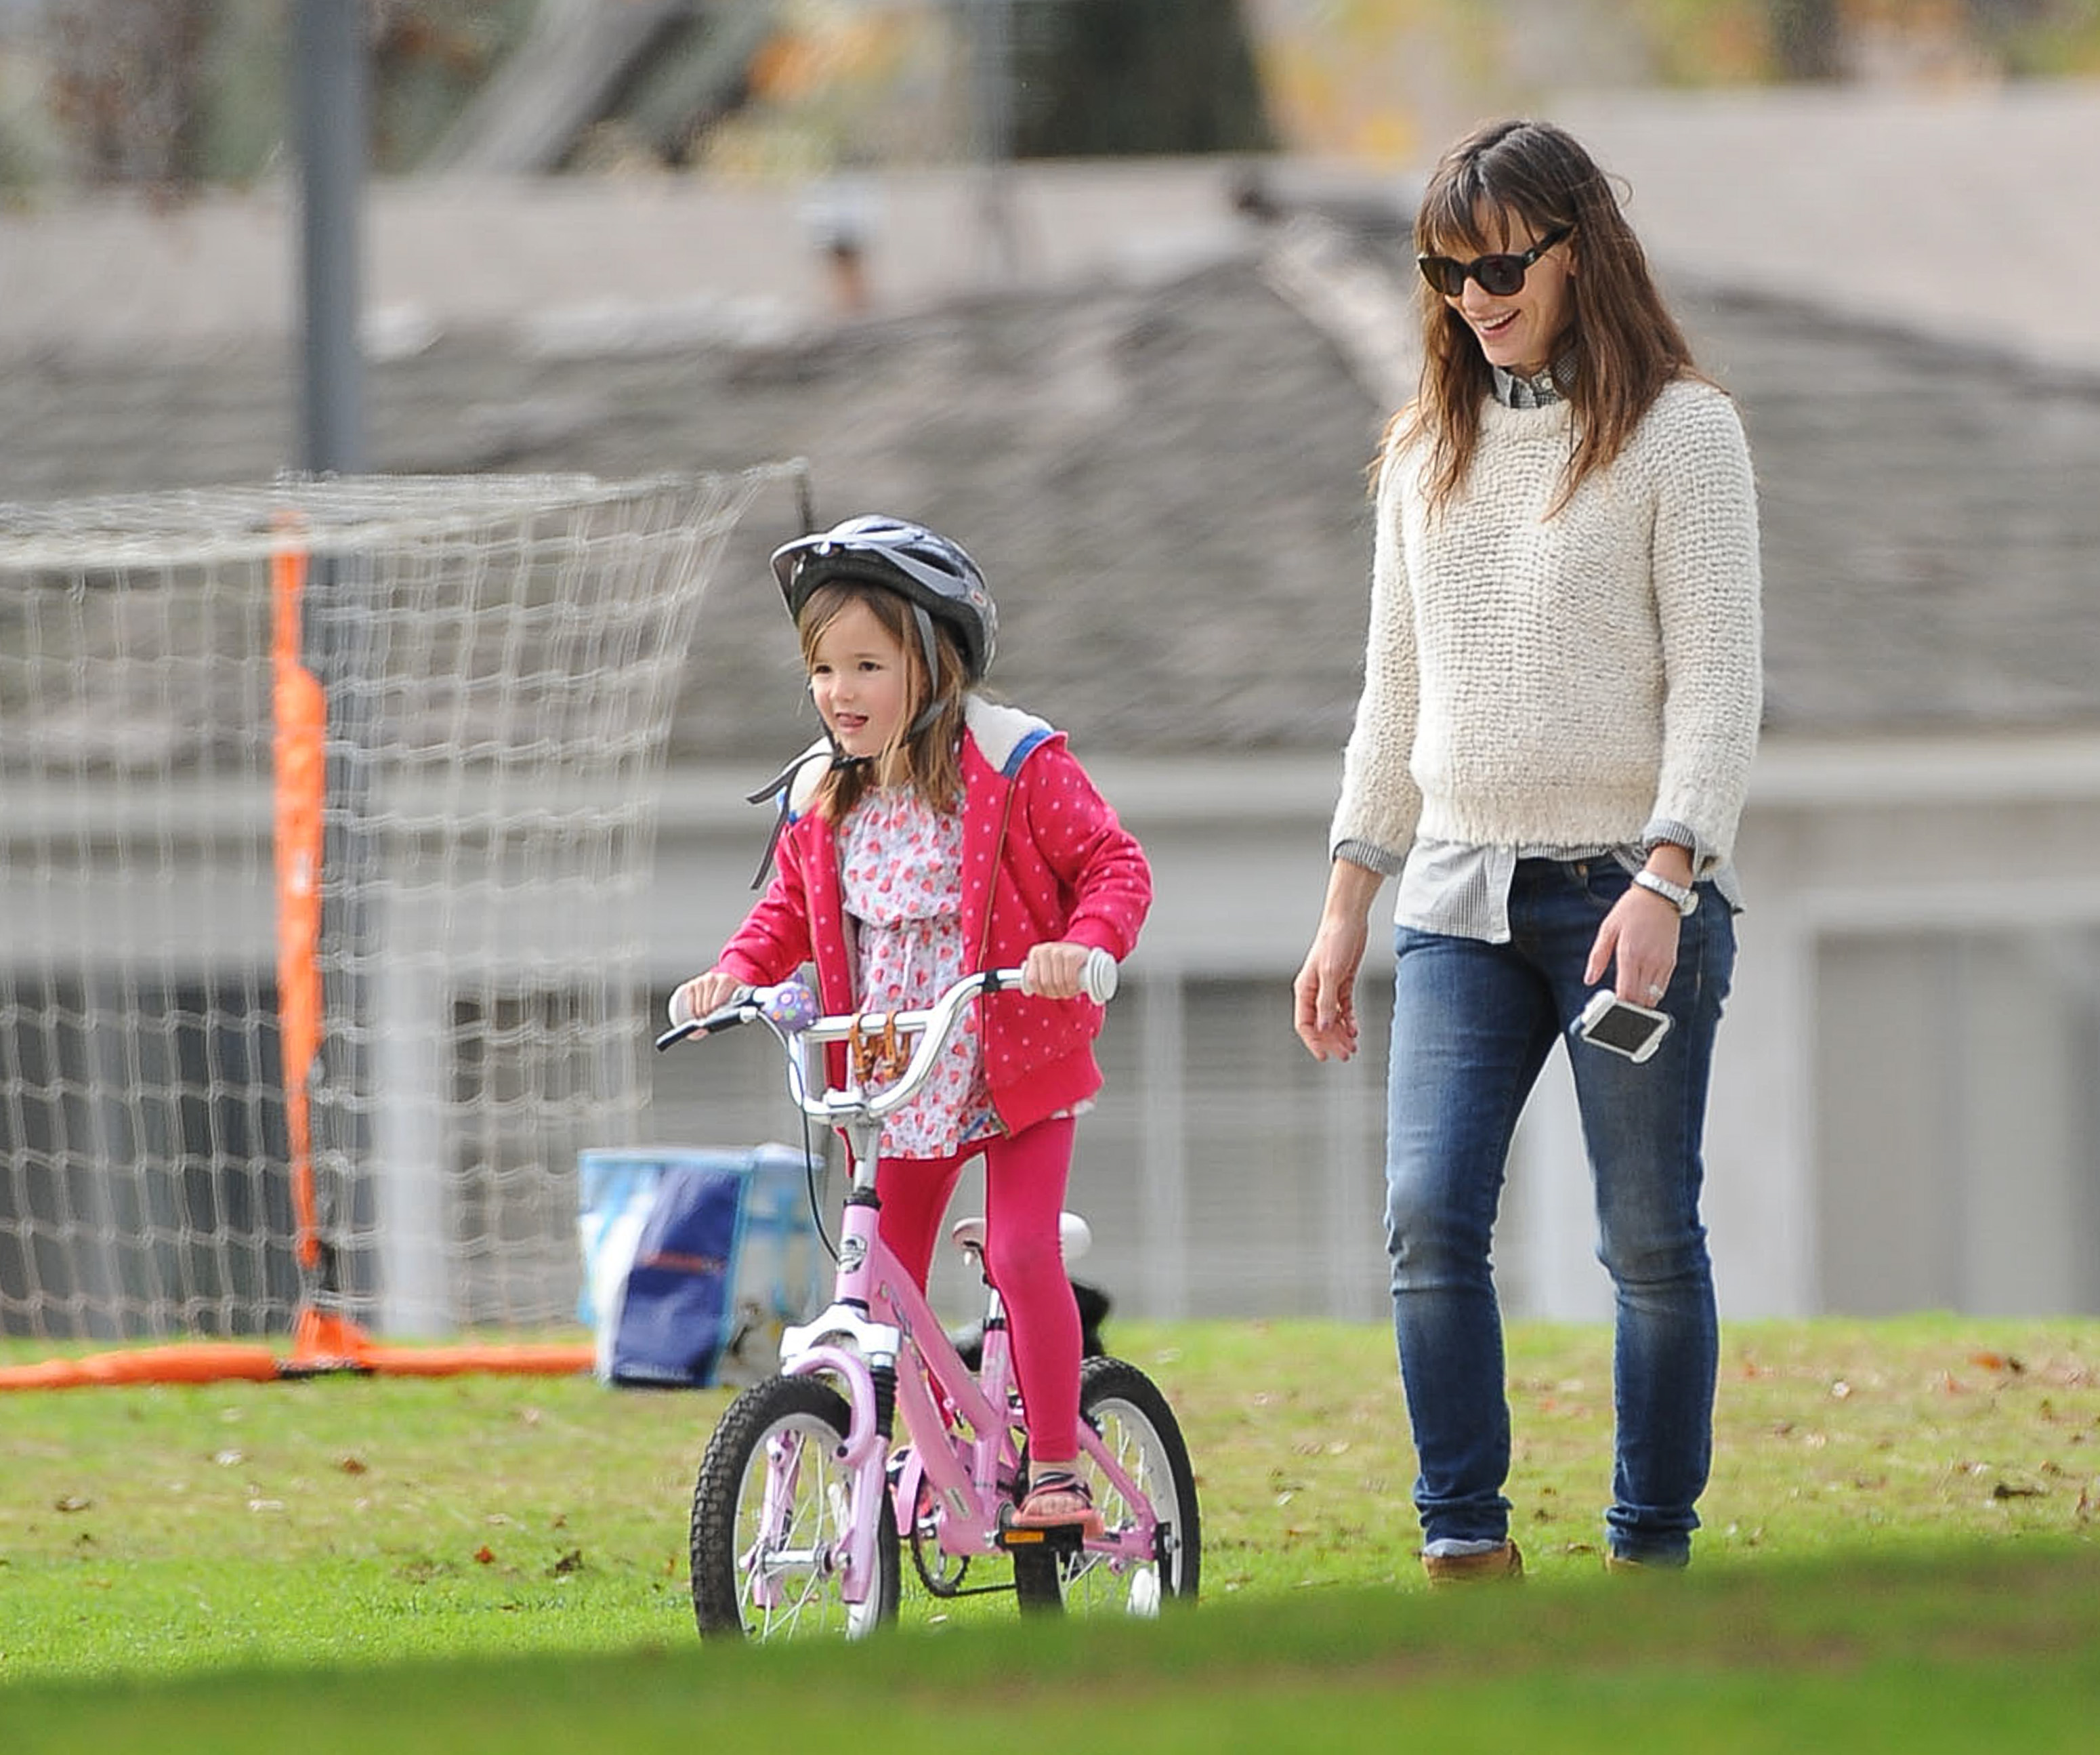 Jennifer Garner and Seraphina Affleck are seen in Los Angeles, California on February 08, 2014 | Source: Getty Images